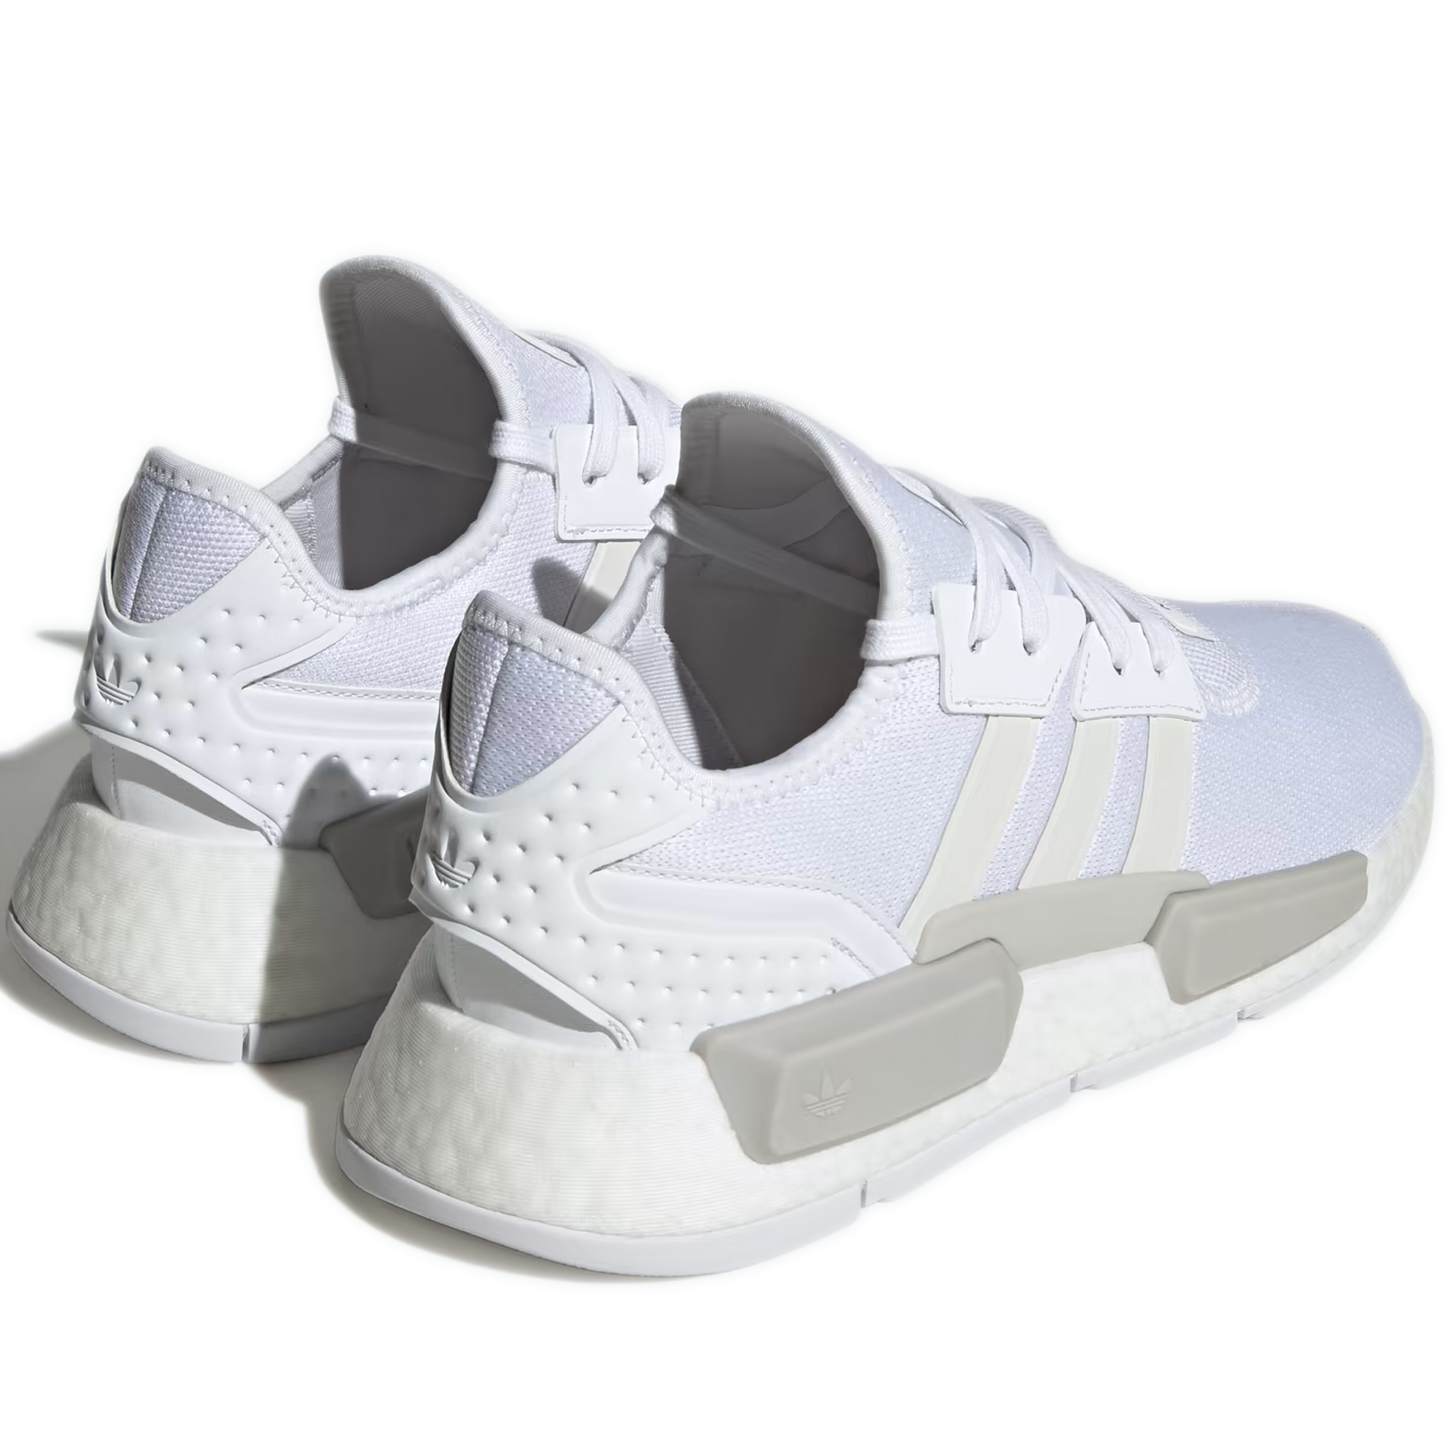 Men's Adidas NMD_G1 Shoes - White/ Grey